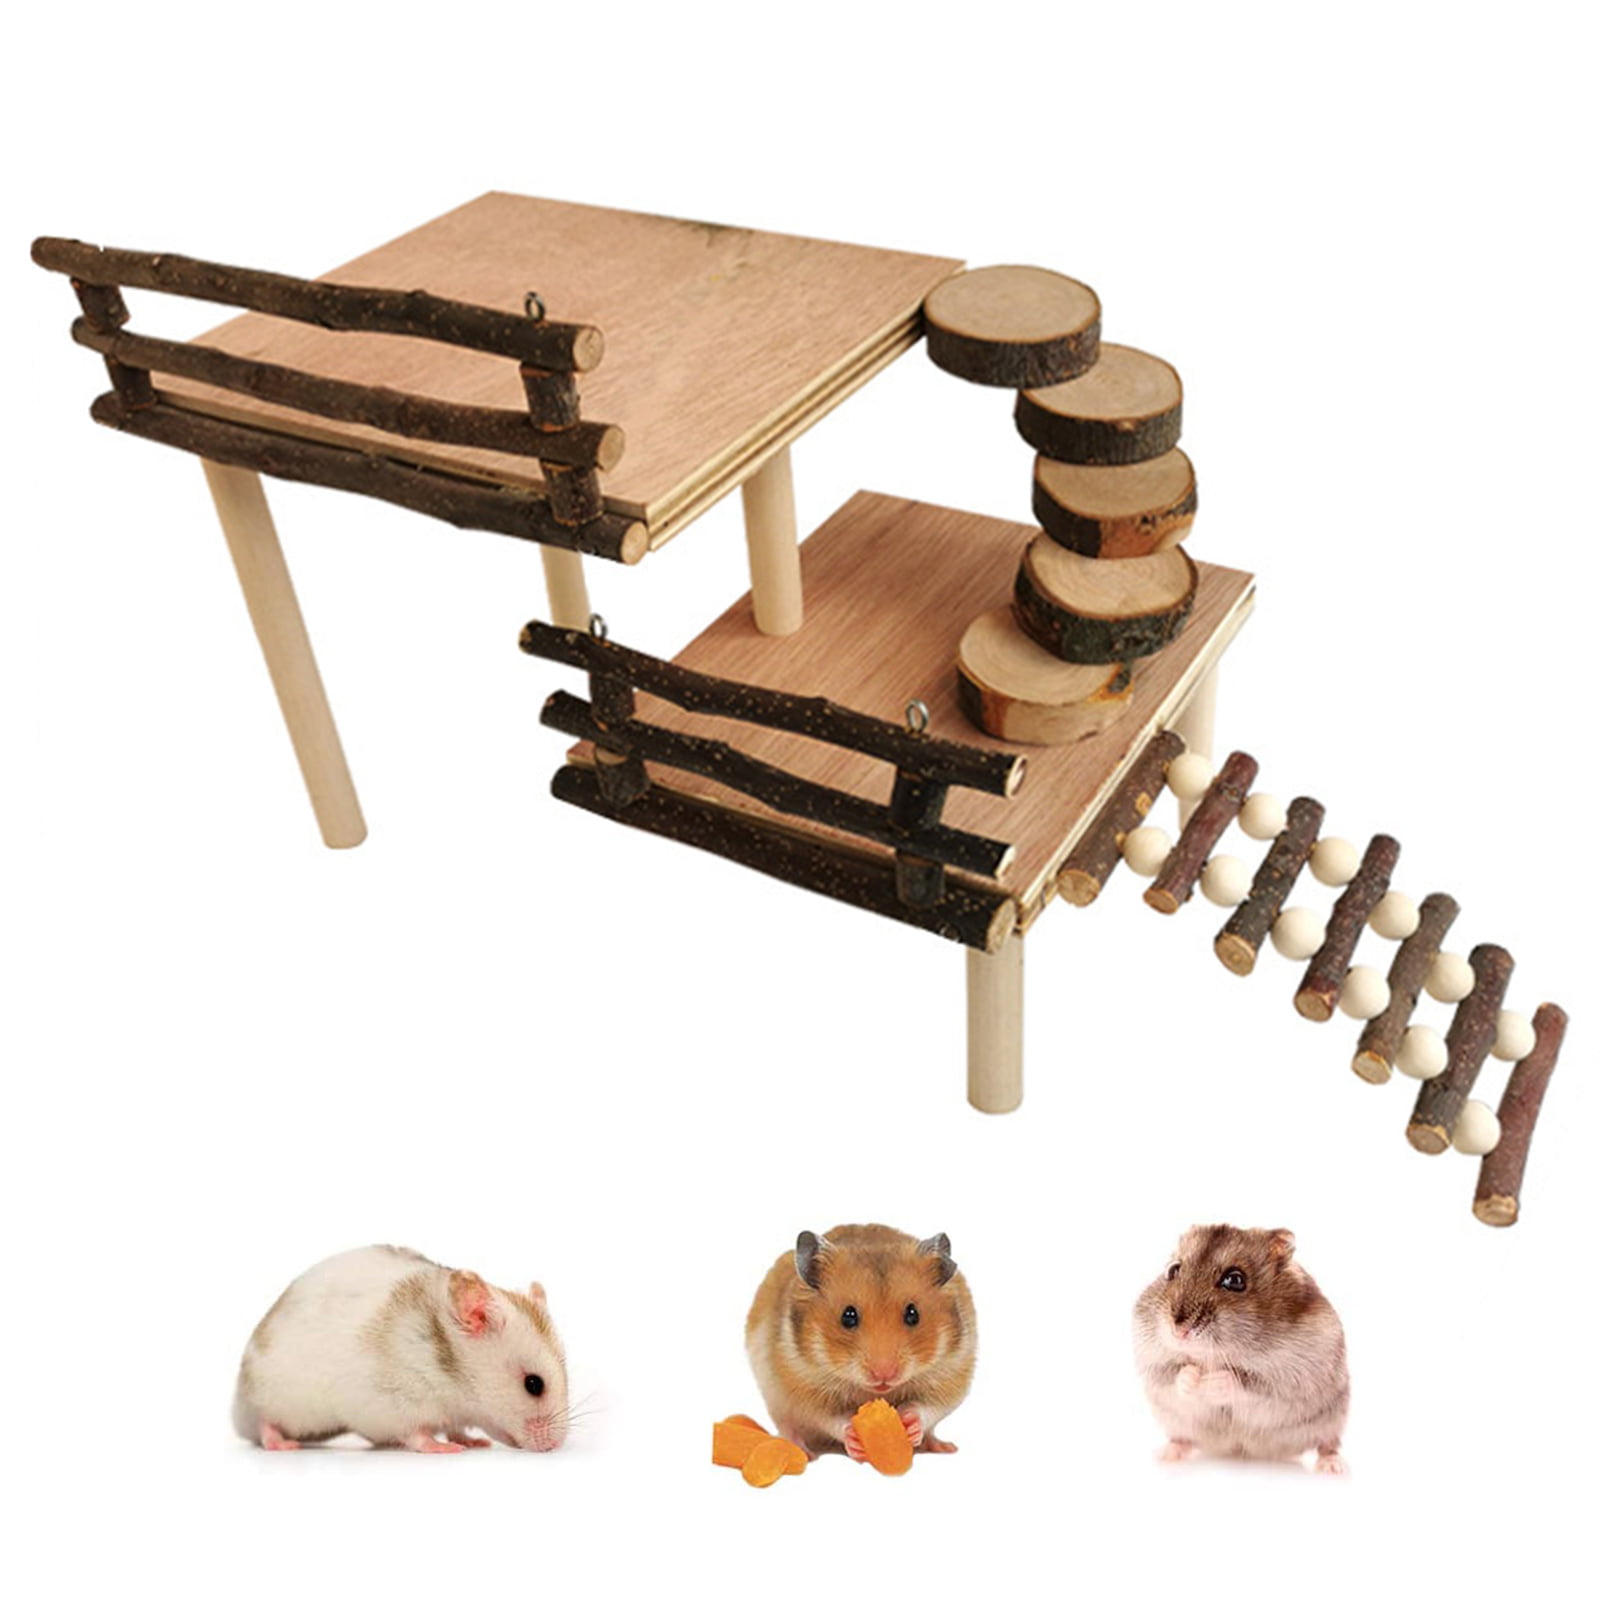 New Home Colorful Natural Wooden Climbing Ladder Molar Toy for Pet Rat Hamsters 